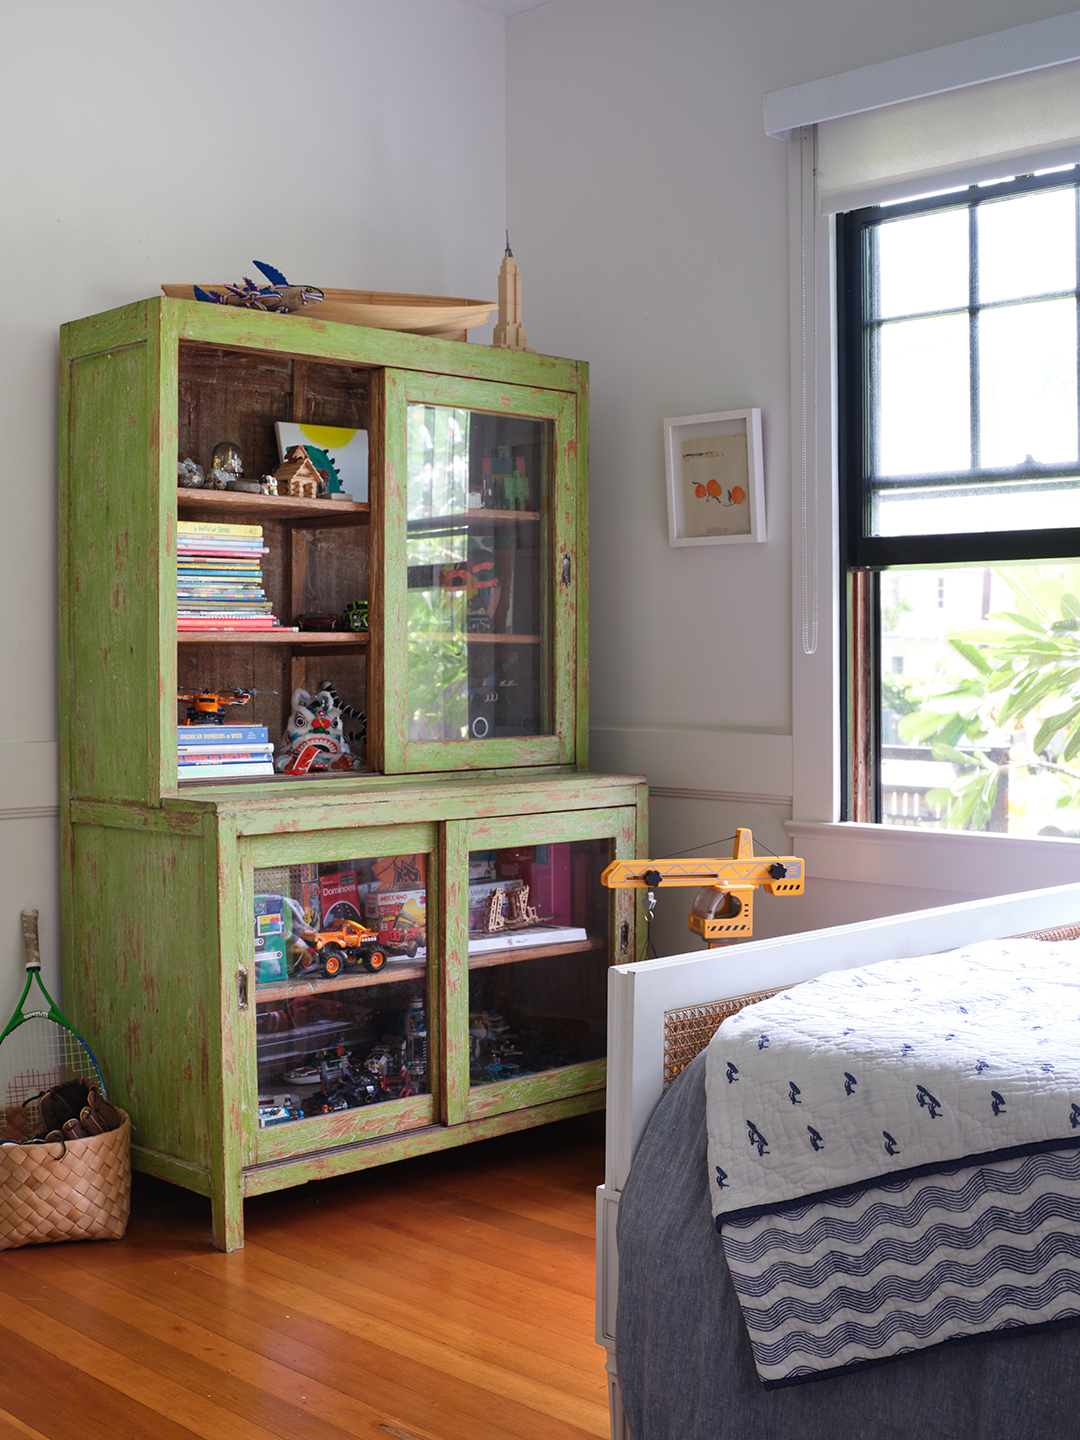 kids room with green cabinet holding toys